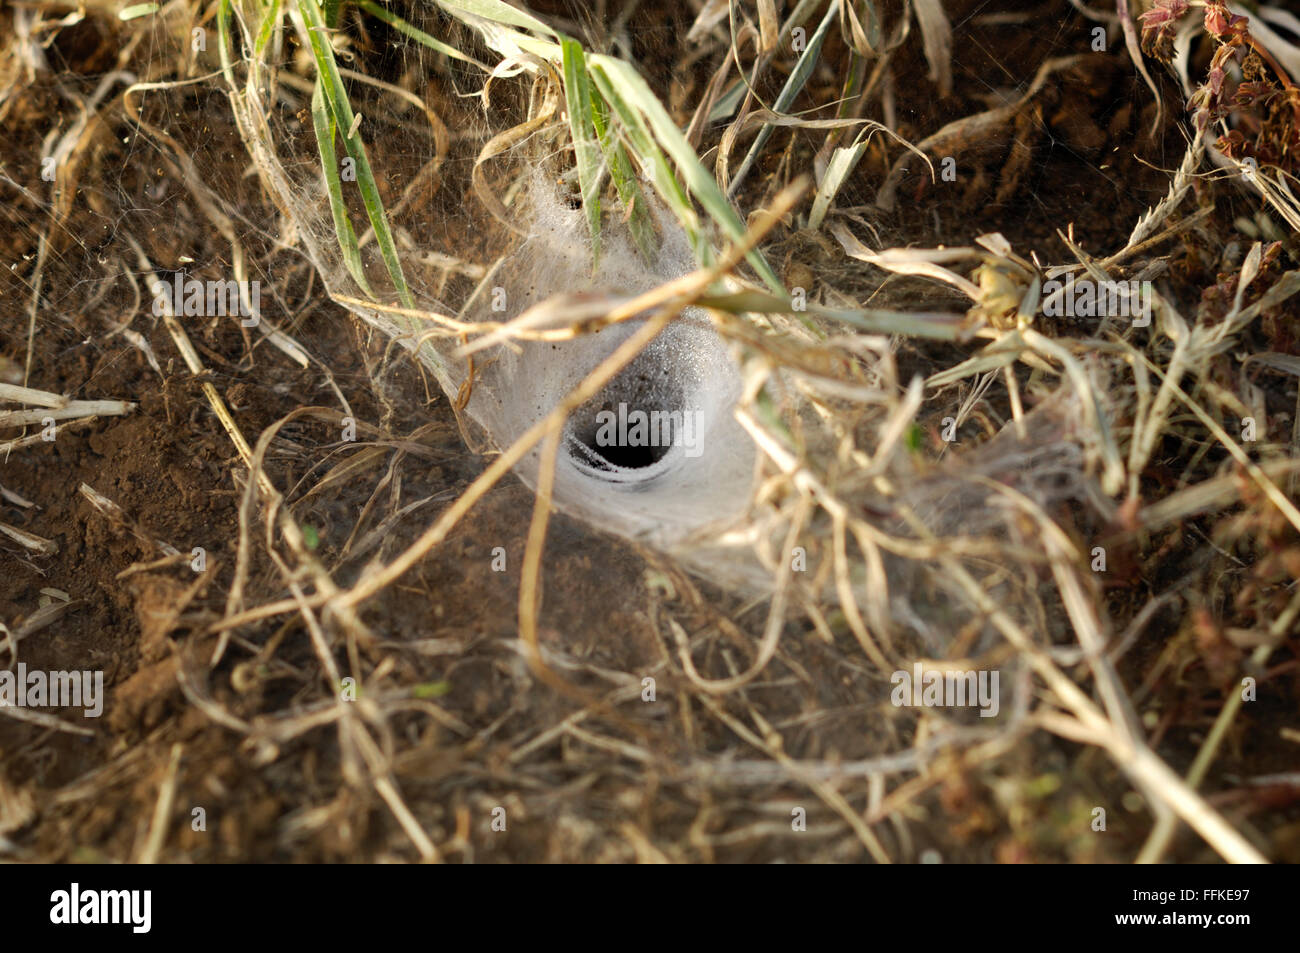 Spiders funnel web on the ground in the Serengeti Stock Photo